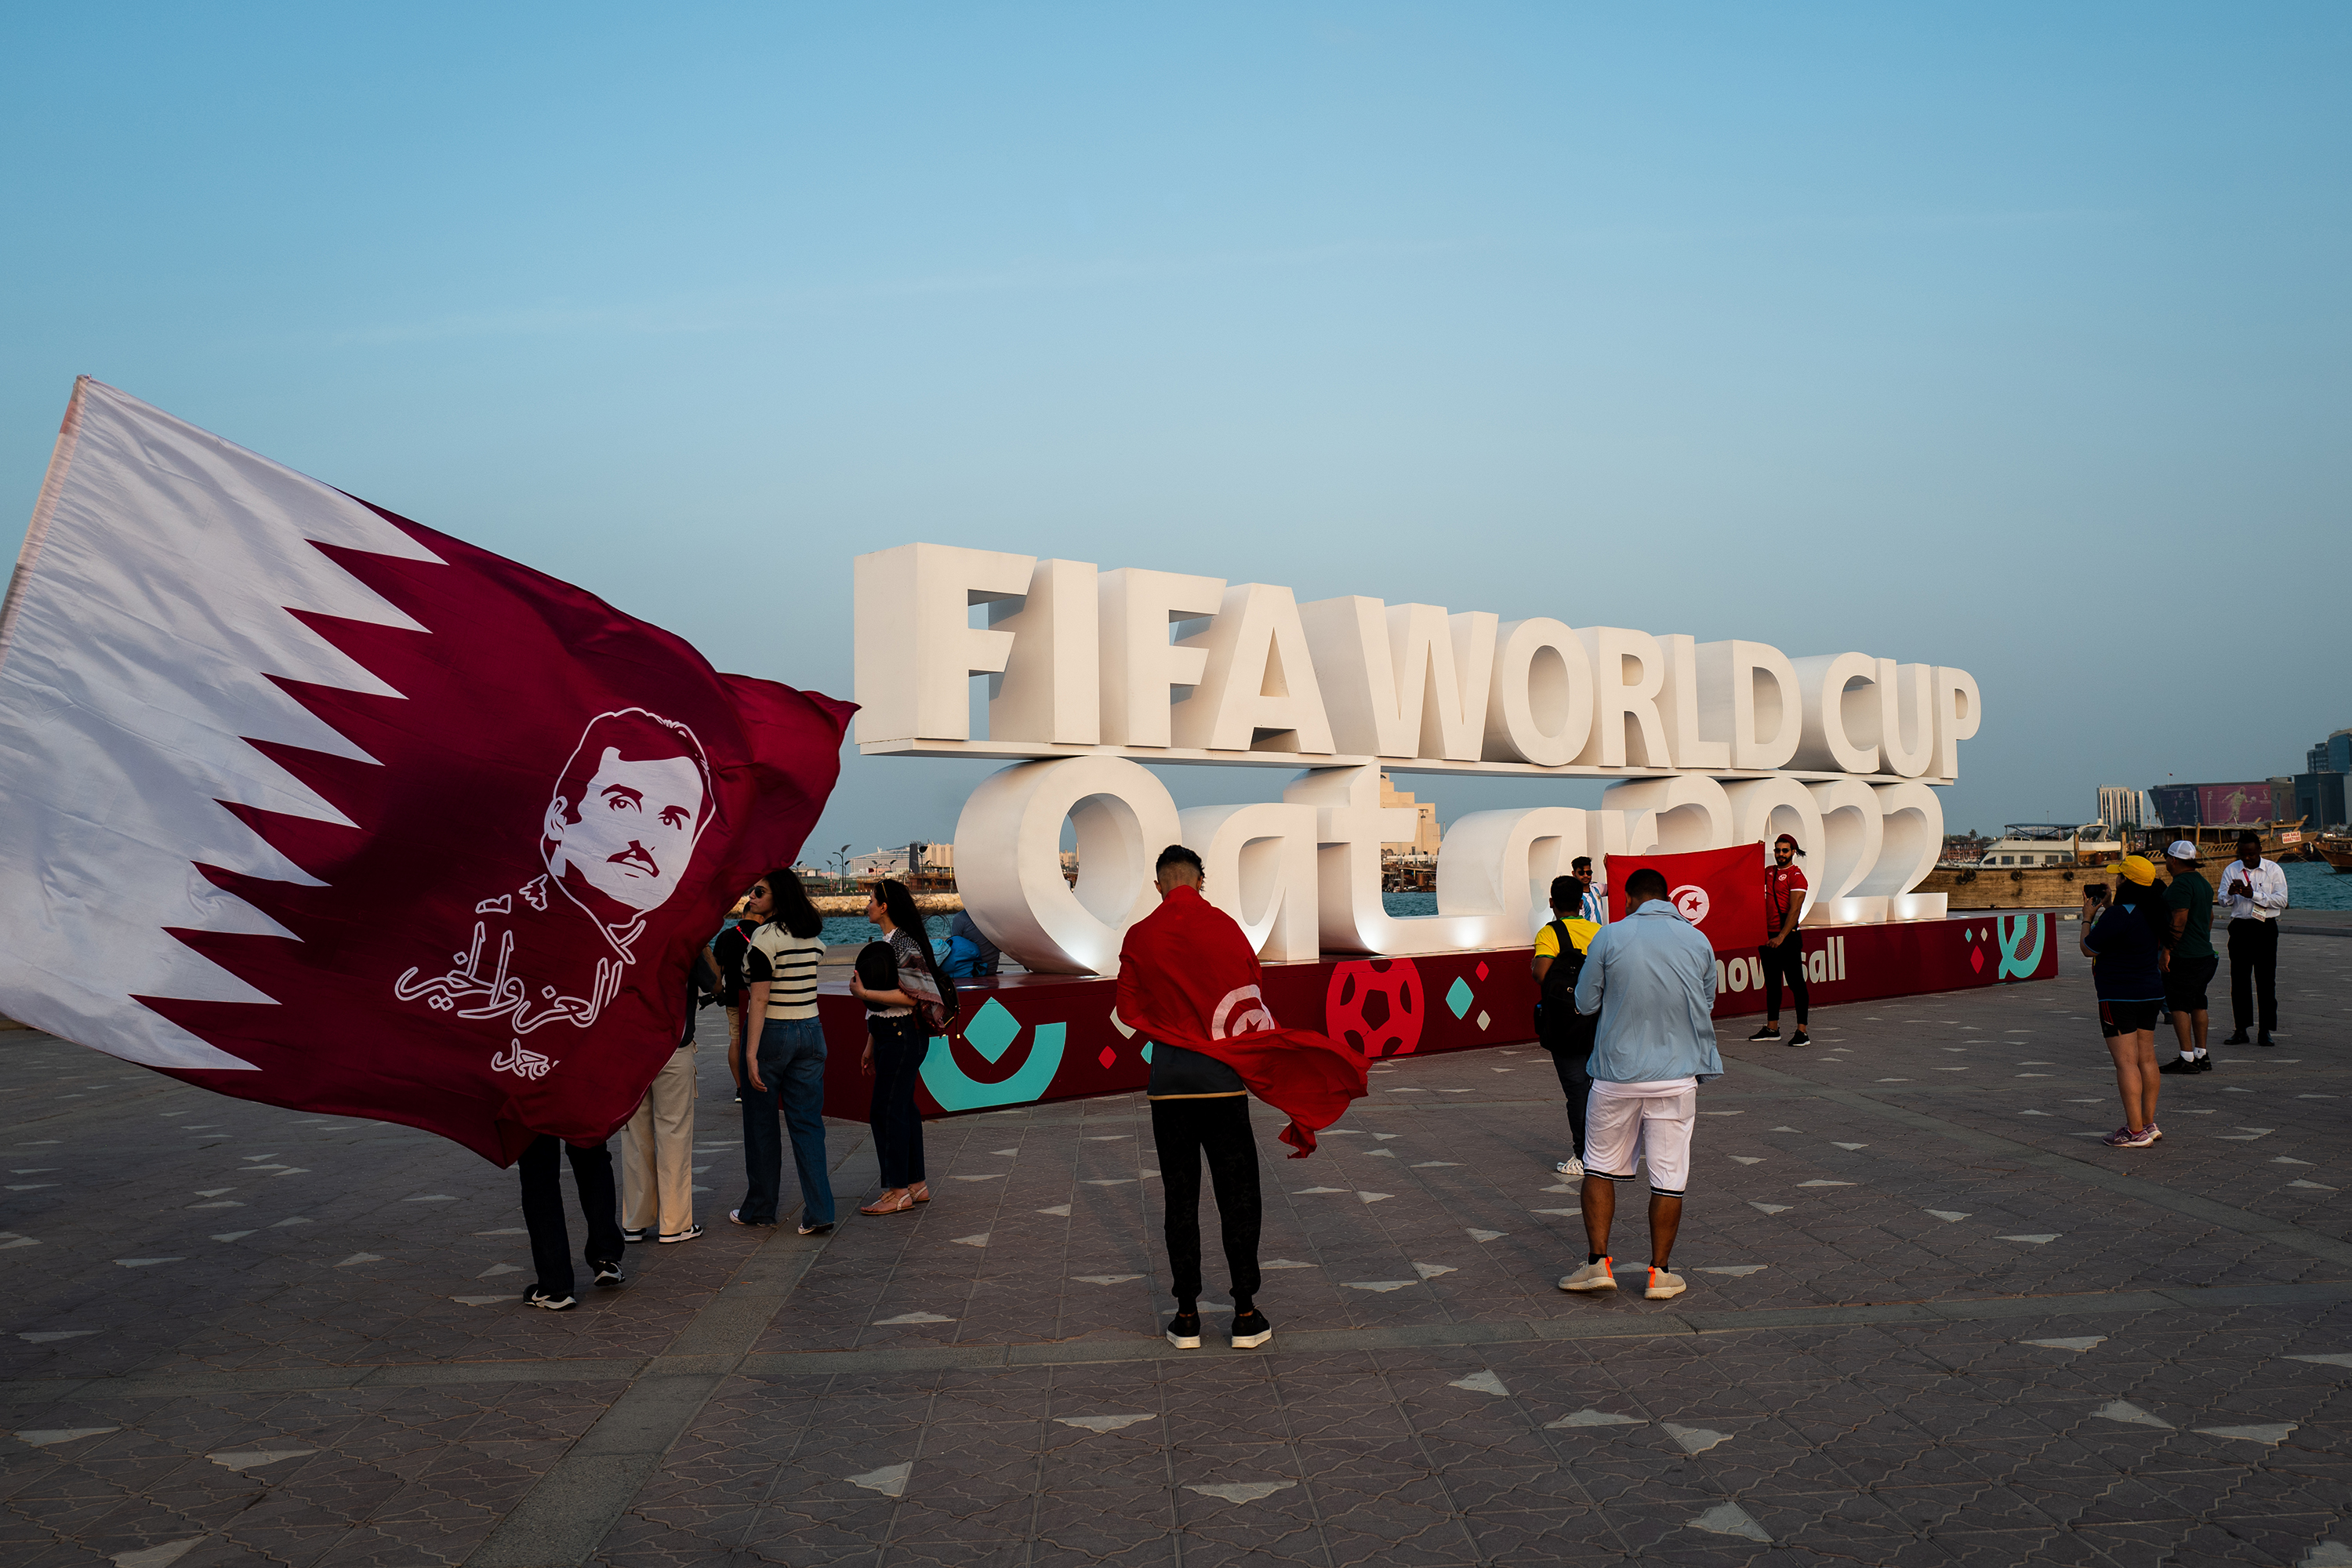 City Life Org - Final match schedule for the FIFA World Cup Qatar 2022™ now  available